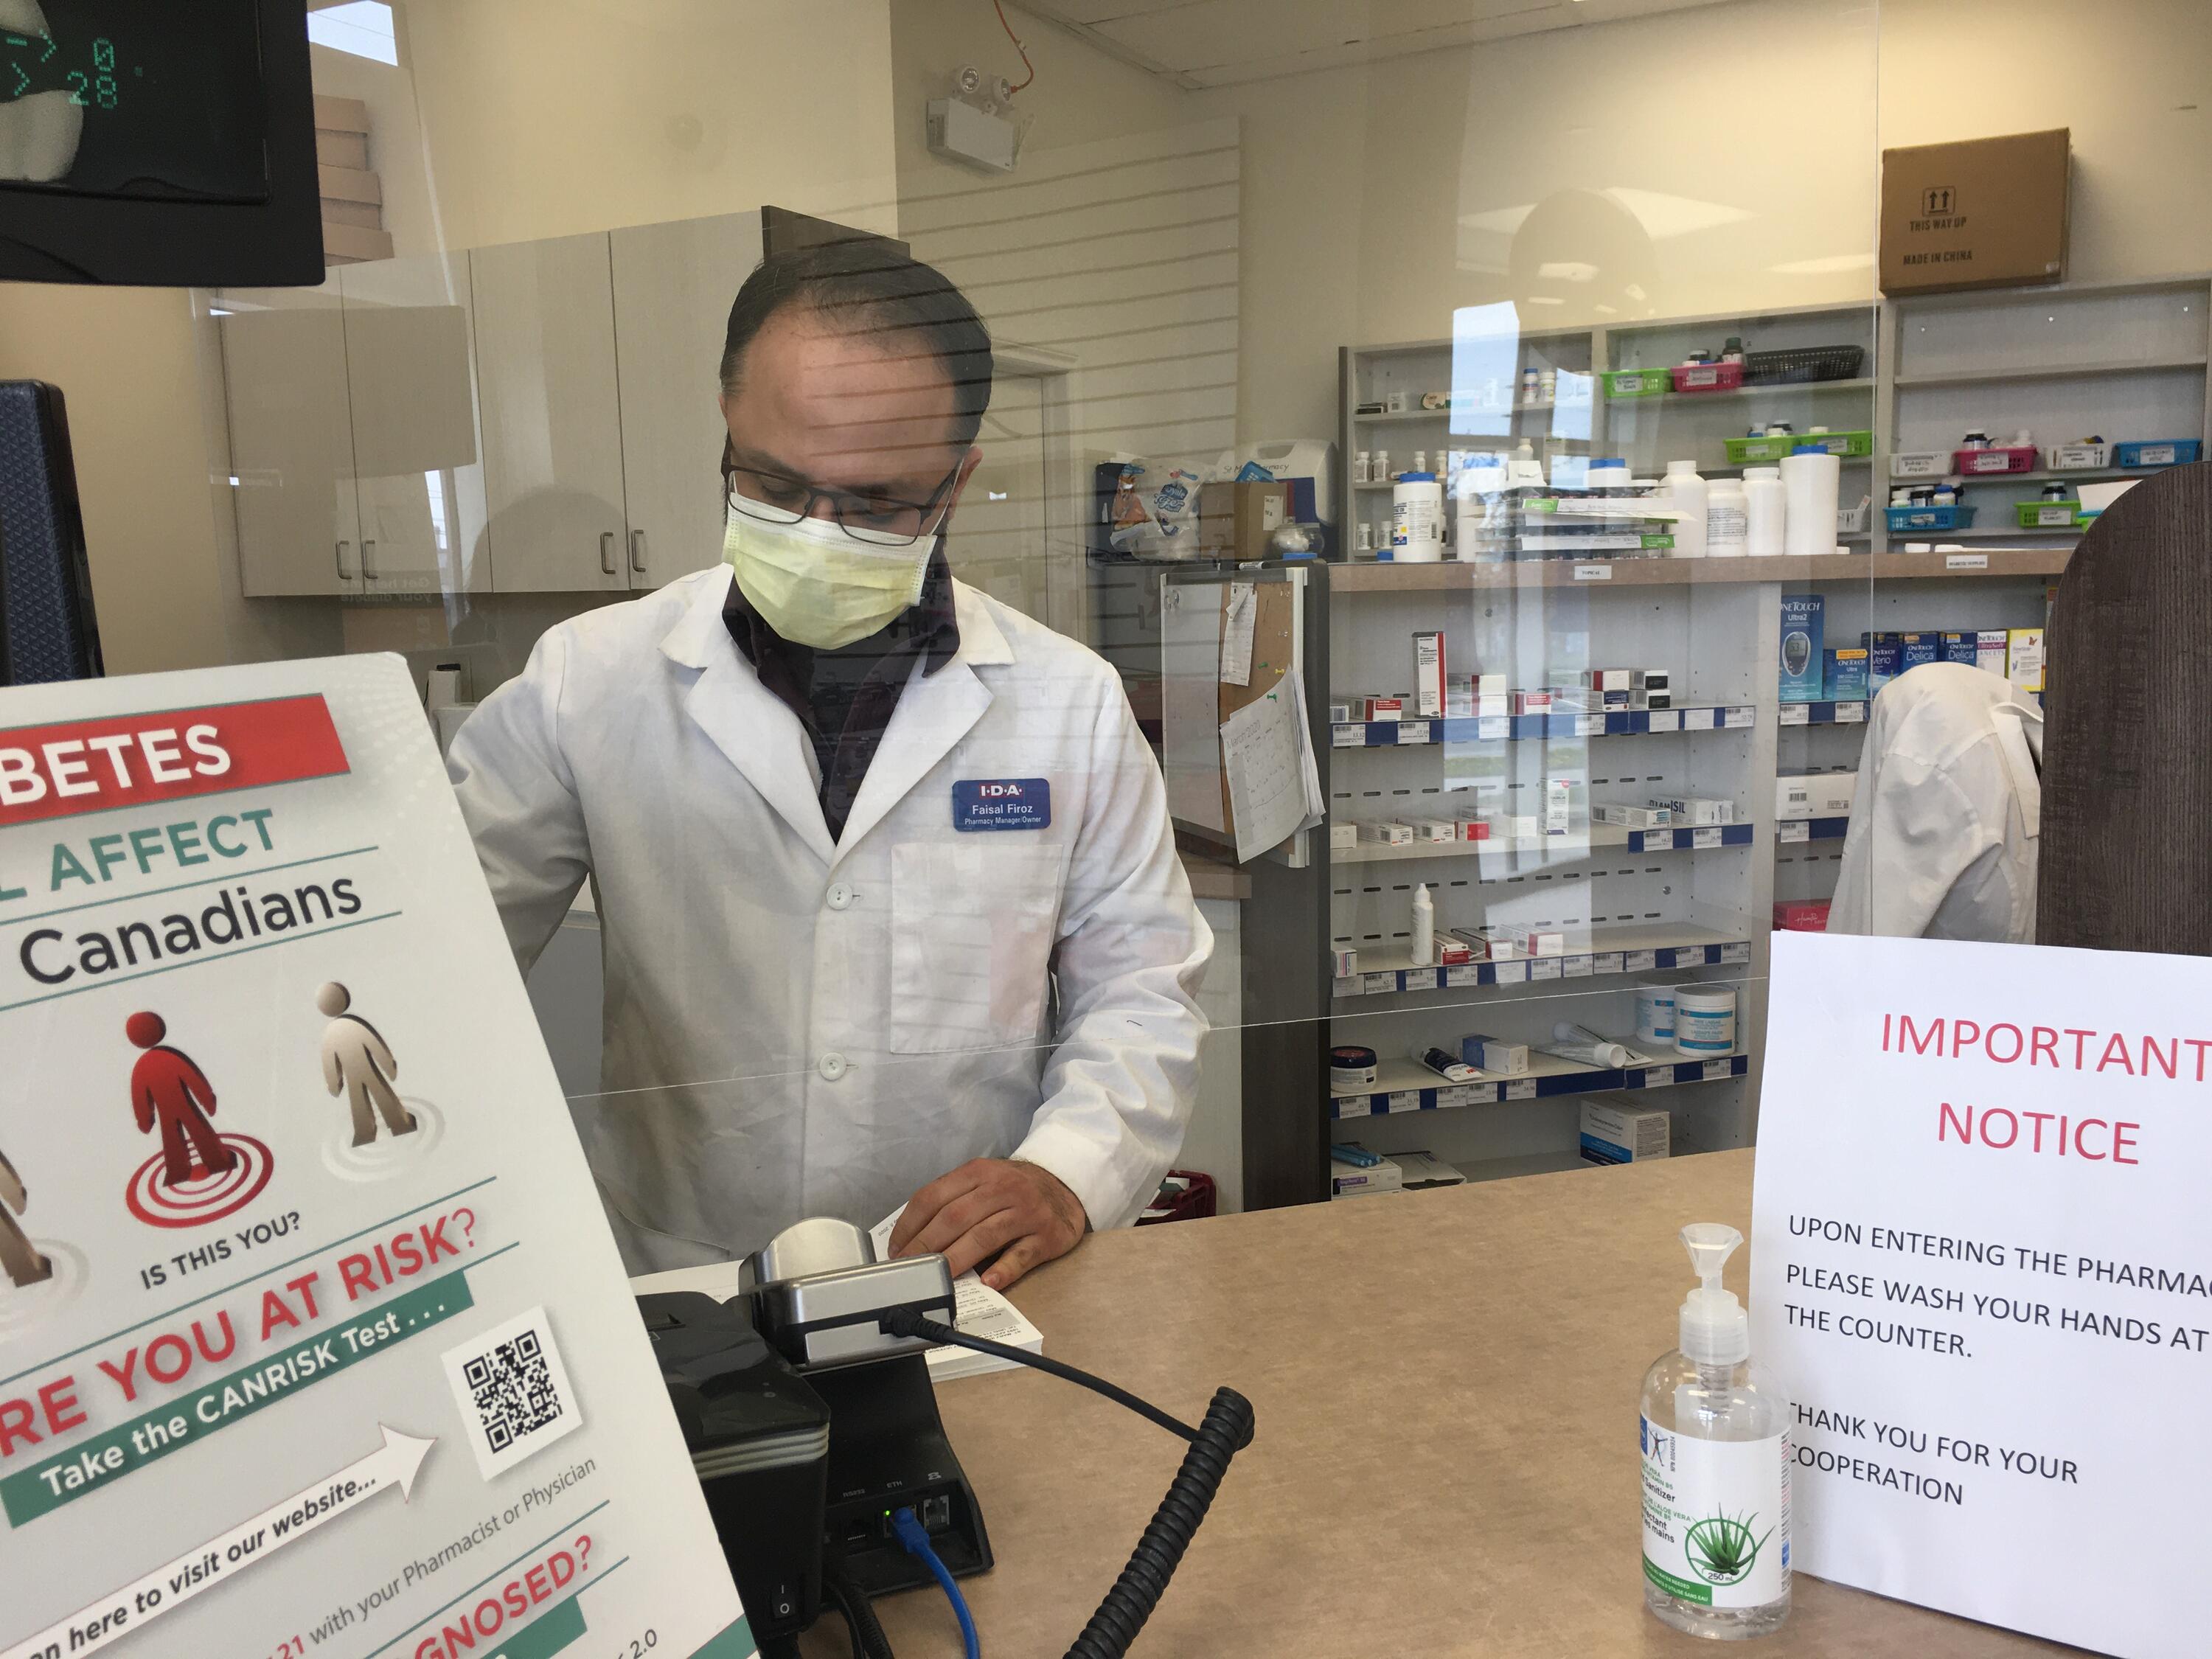 Faisal working at the pharmacy counter